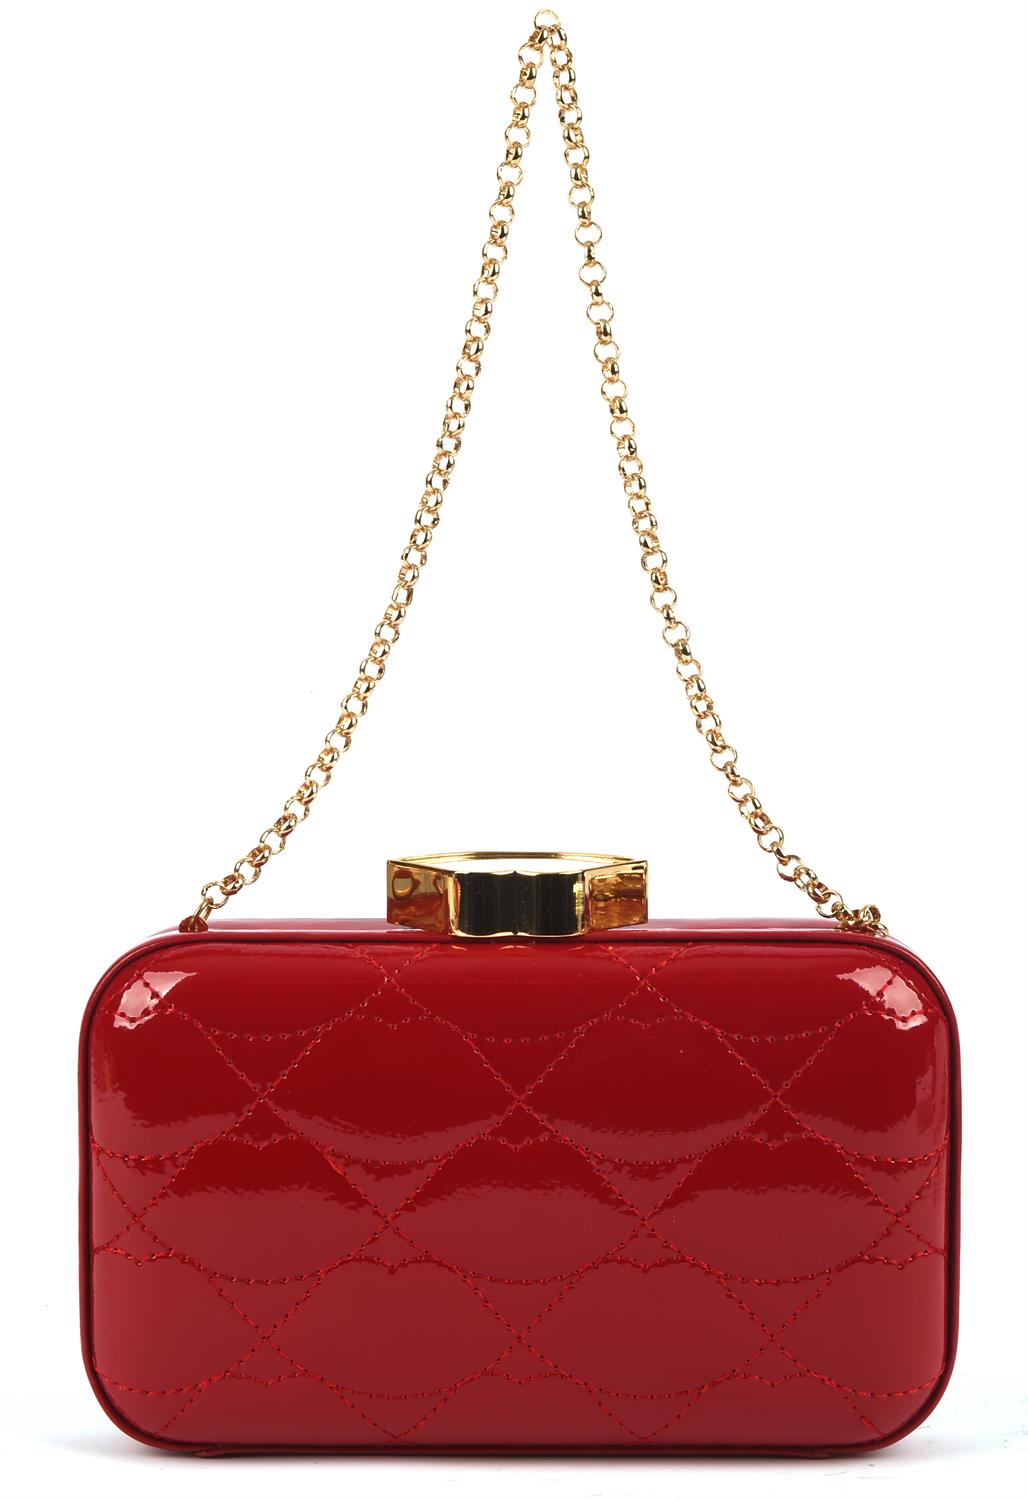 LULU GUINNESS boxed lipstick red leather lips handbag with gold chain and hardware with dust bag - Image 3 of 7